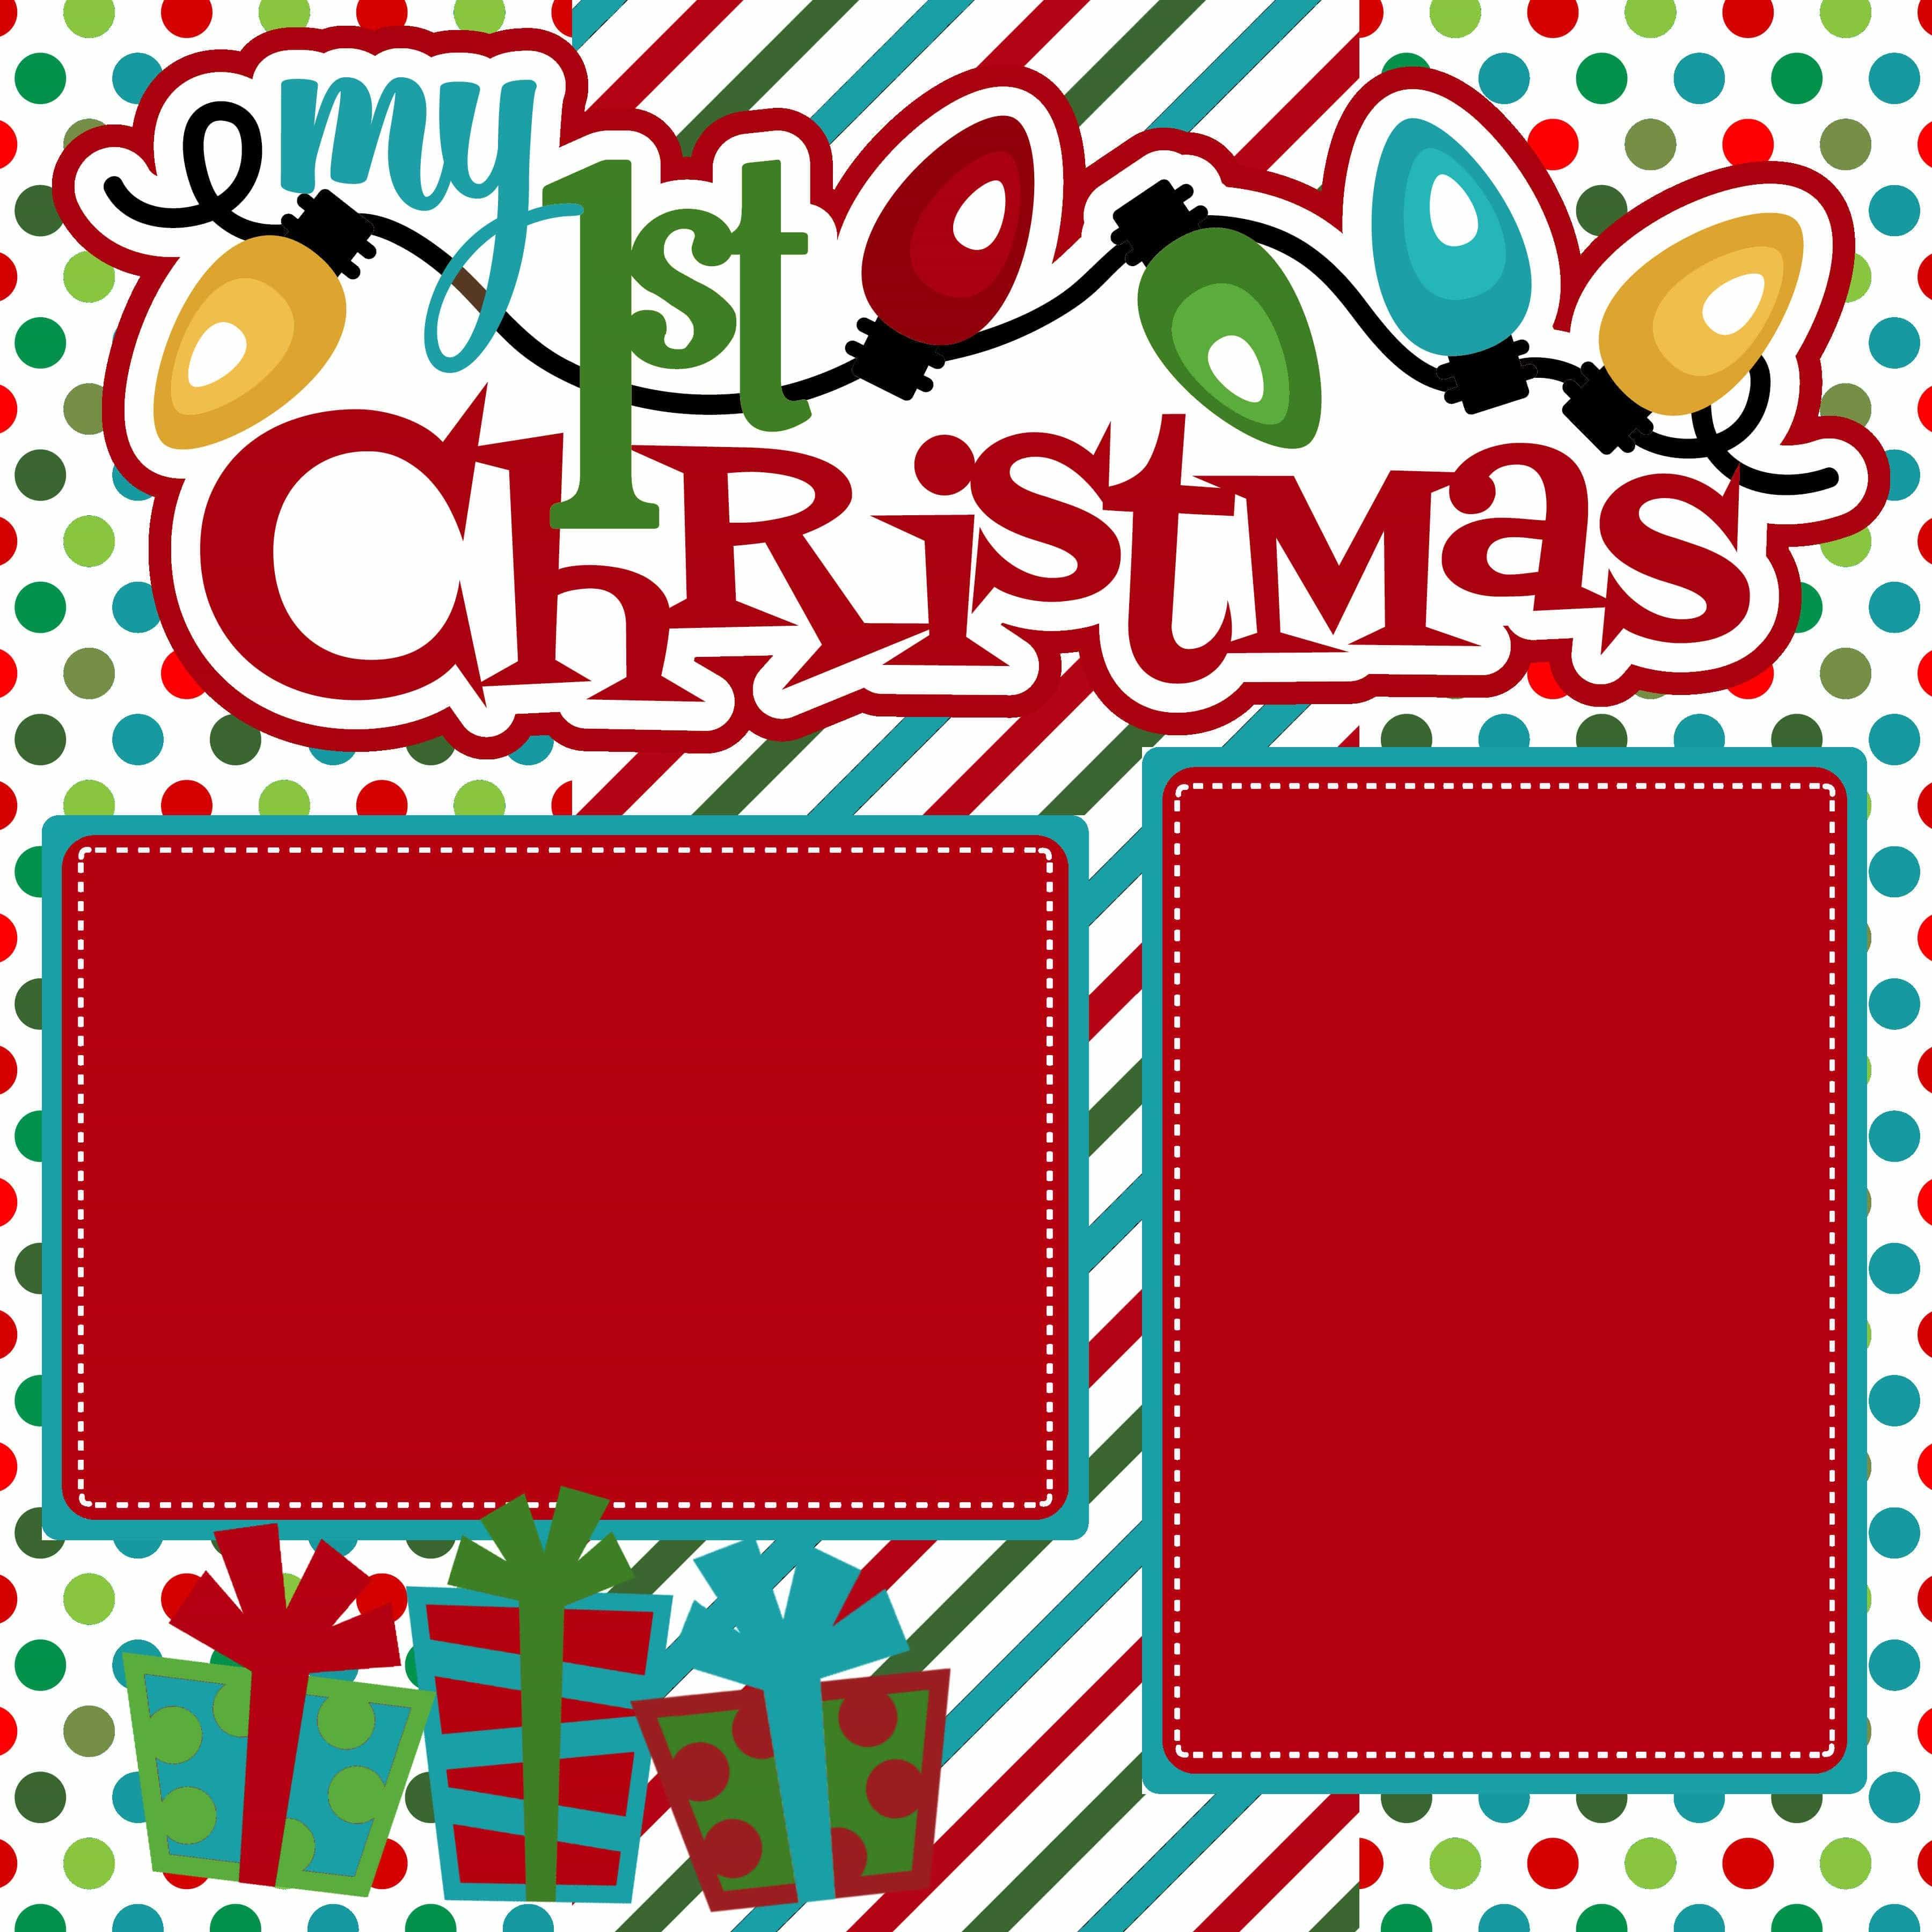 My First Christmas (2) - 12 x 12 Premade, Printed Scrapbook Pages by SSC Designs - Scrapbook Supply Companies